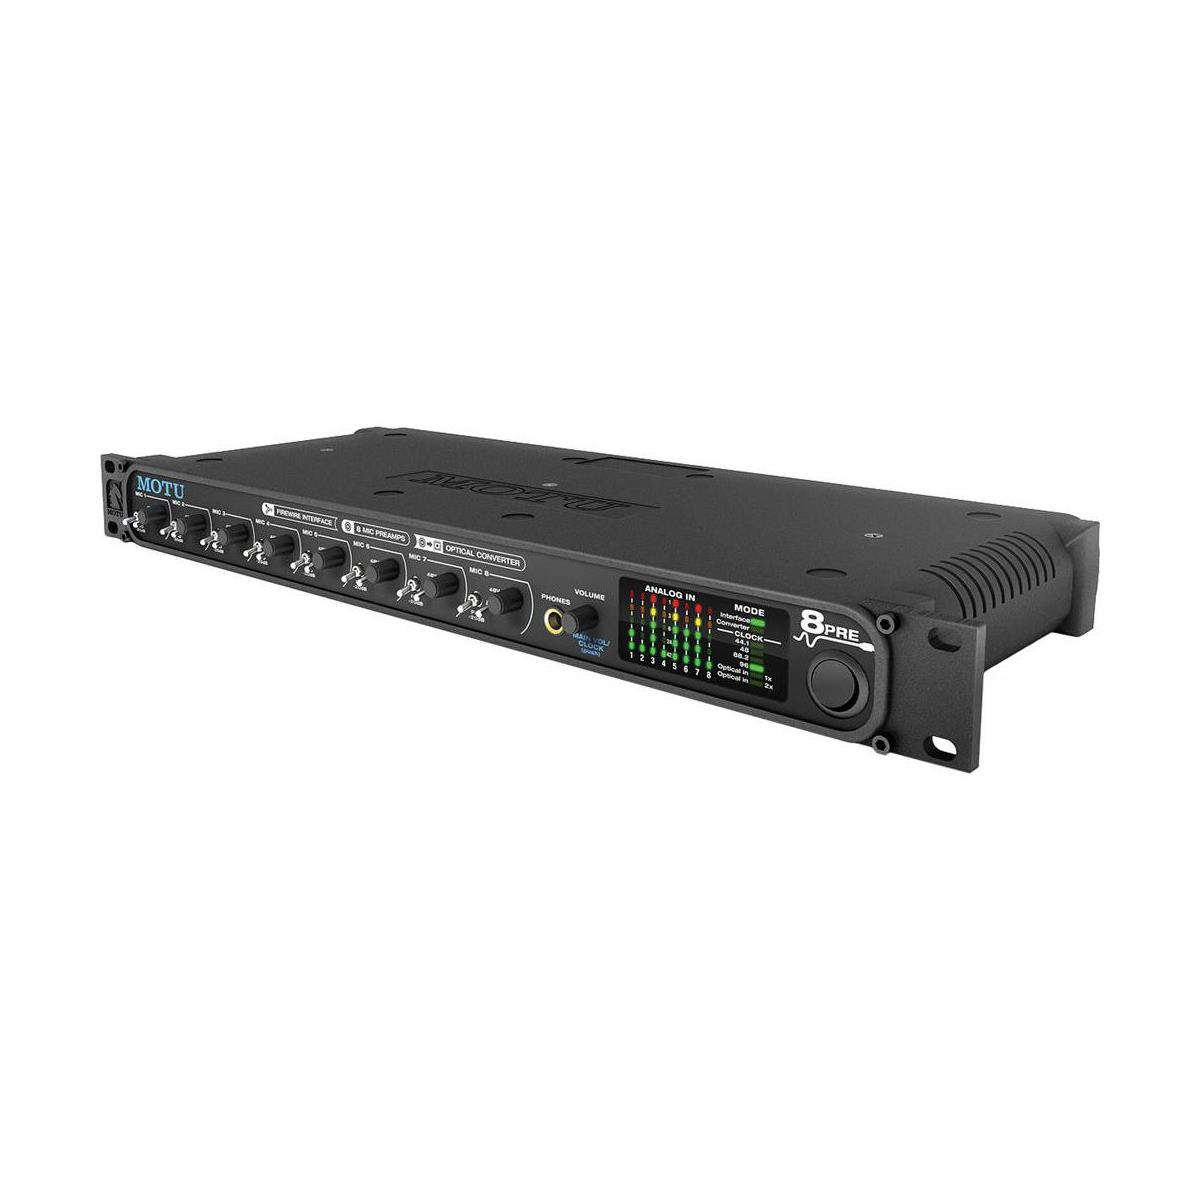 

MOTU 8pre 16x12 USB 2.0 Audio Interface with 8 Mic Inputs & Optical Expansion